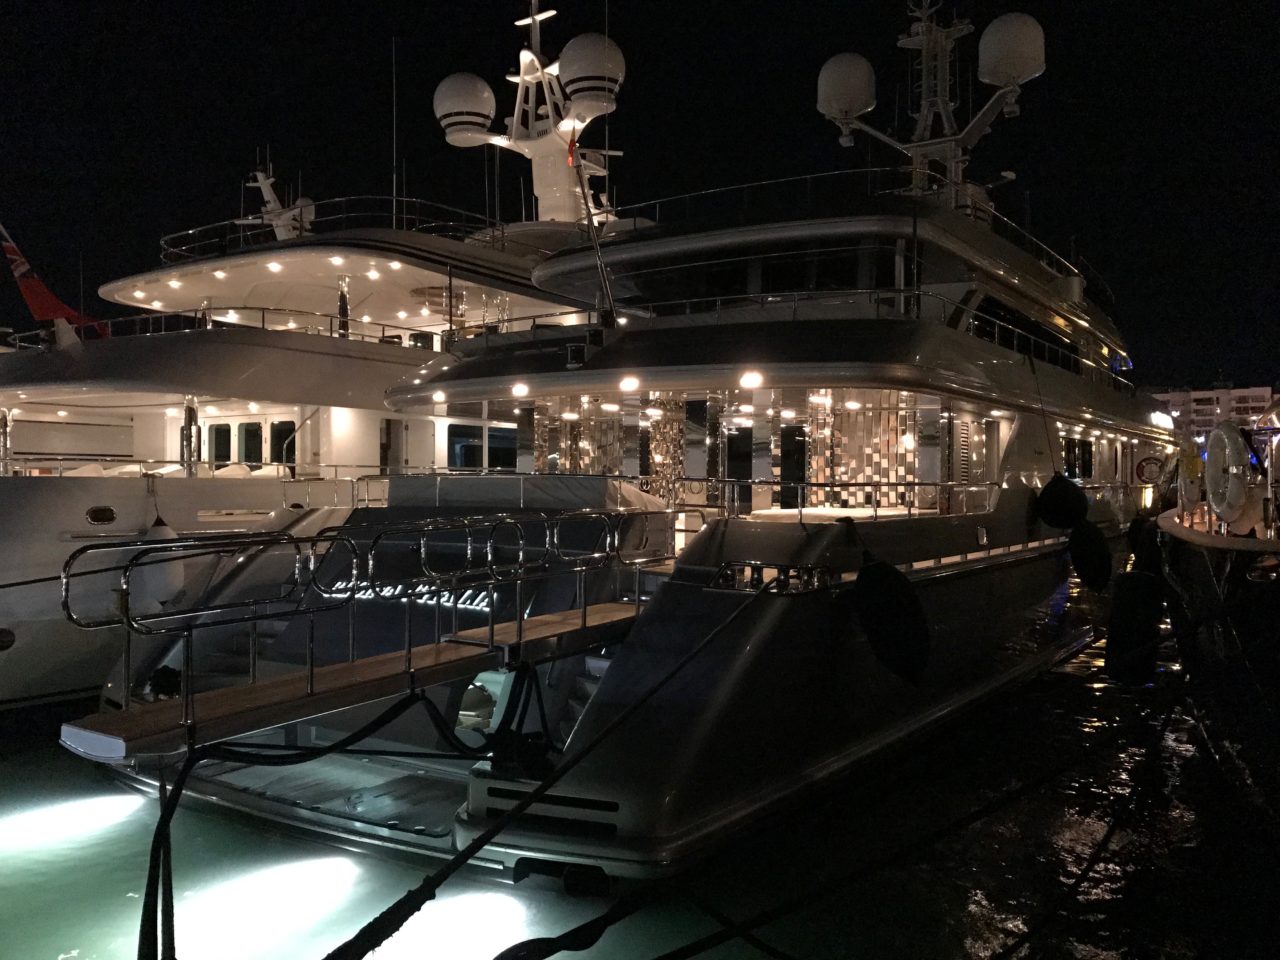 Black Luxury Yacht With Lights By Dock